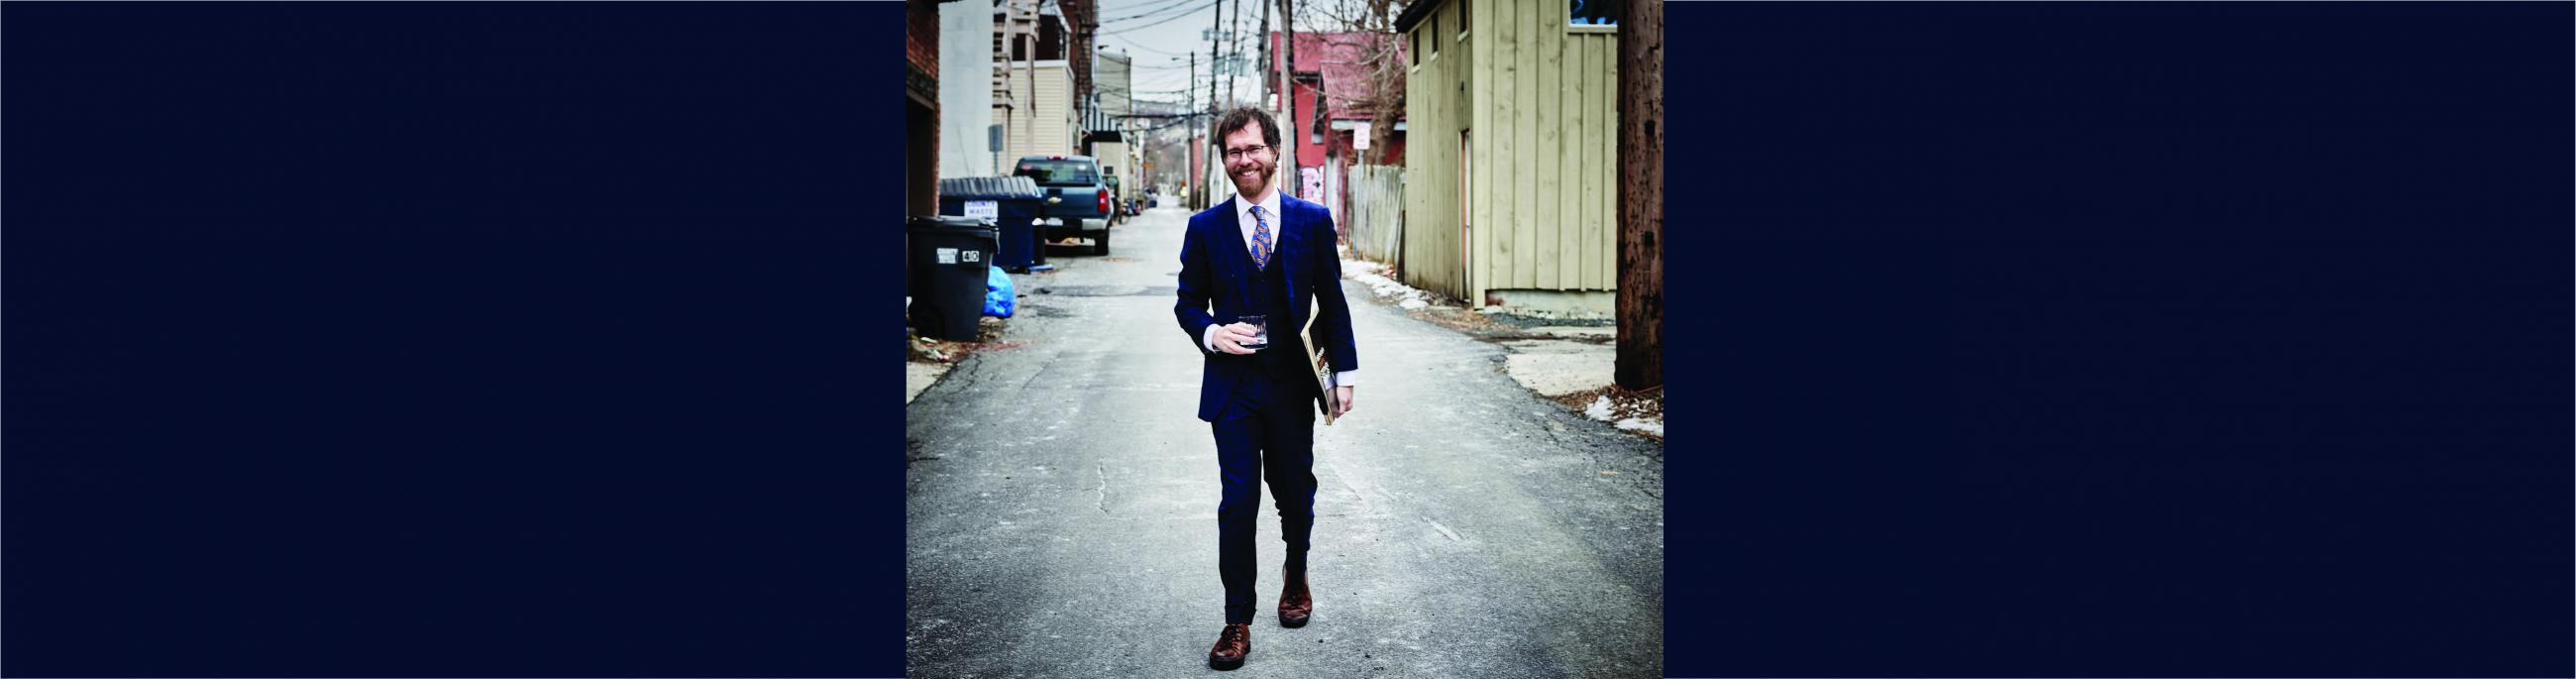 A man with glasses, a beard and brown hair wears a suit, walking in an alley.